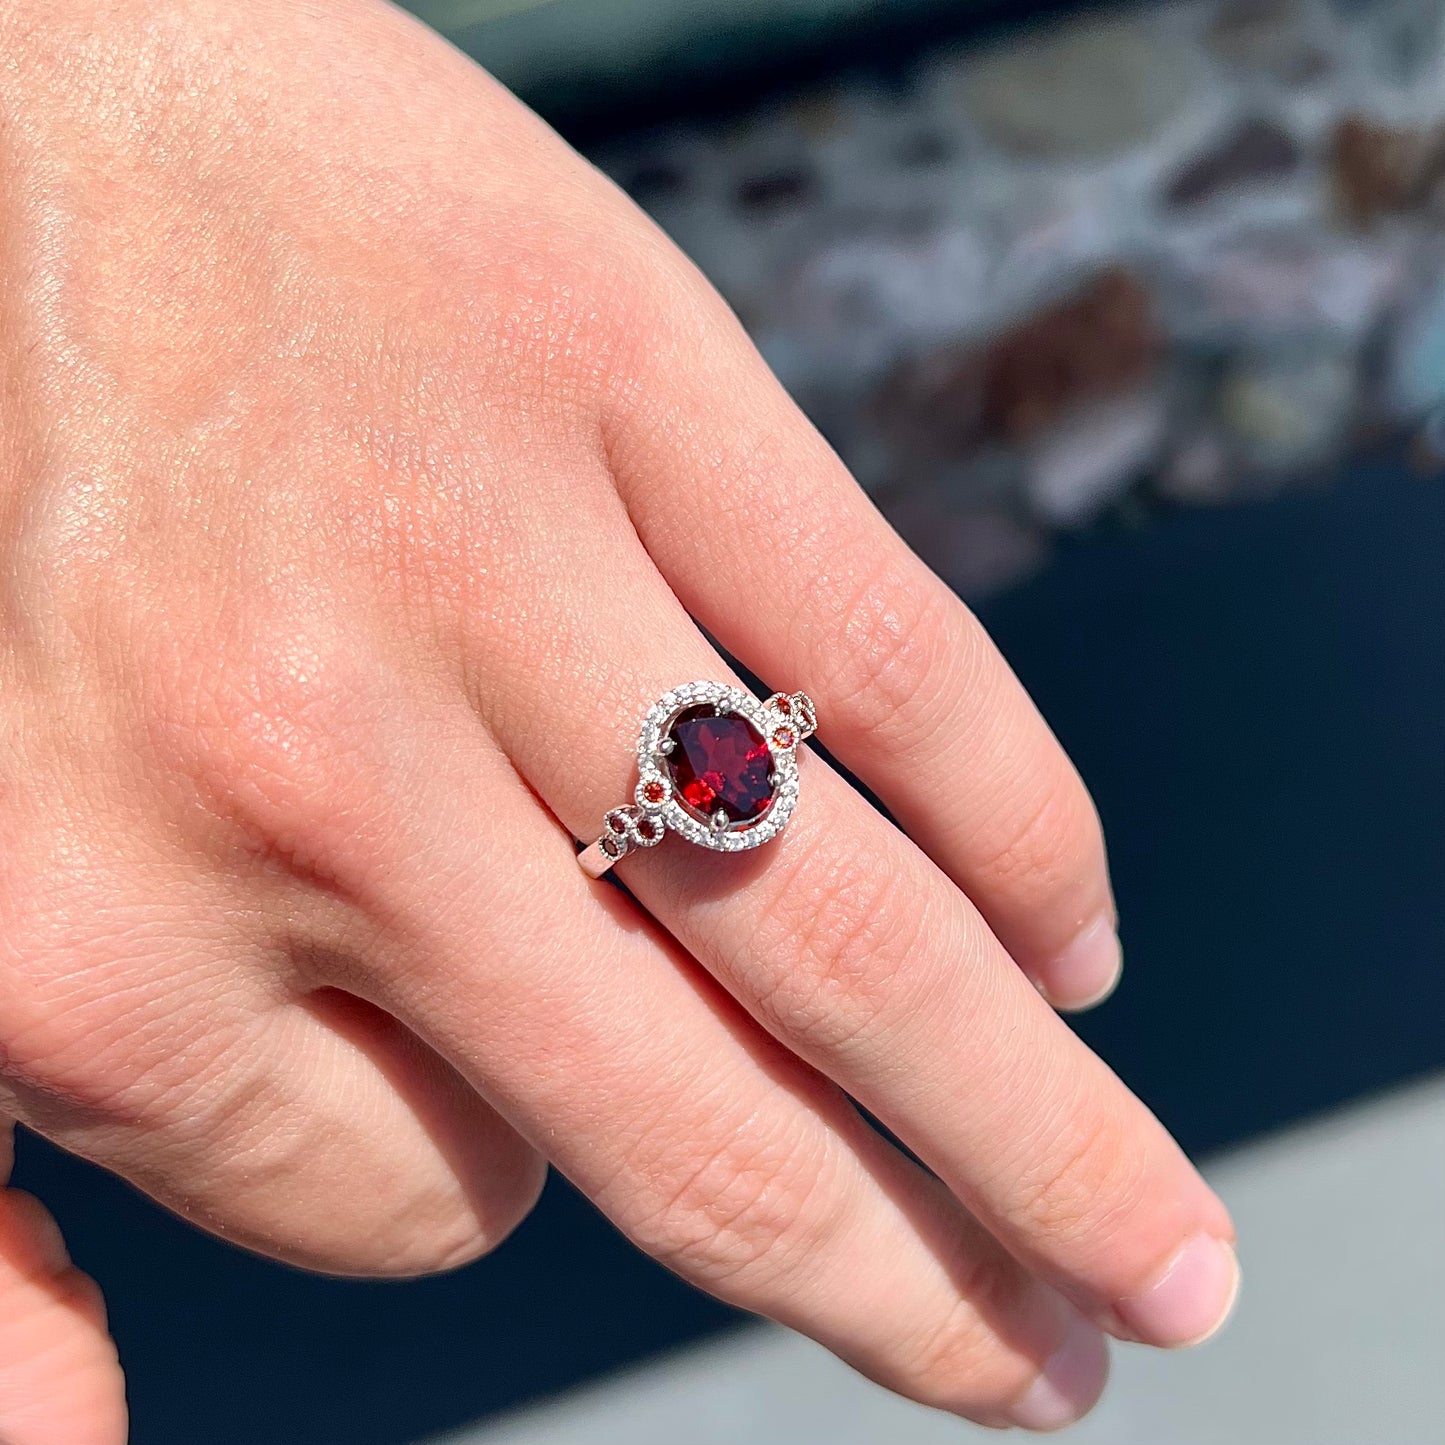 A silver garnet and CZ halo ring.  The center stone is a red almandine garnet, and the side garnets are orange.